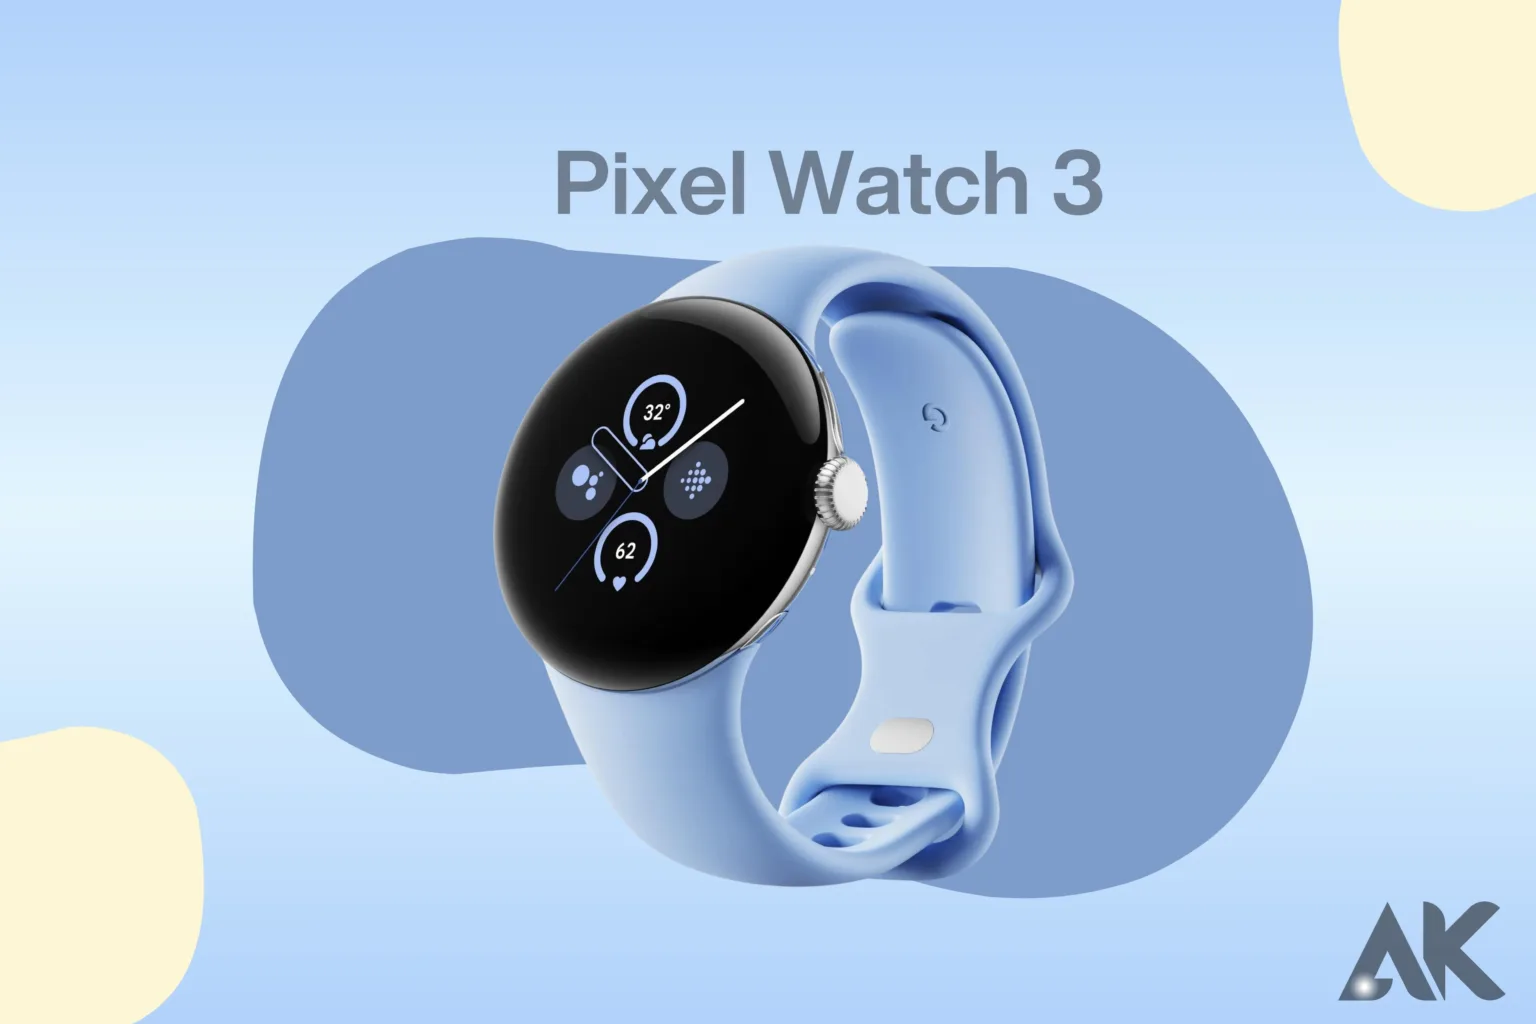 Is the Pixel Watch 3 worth buying?